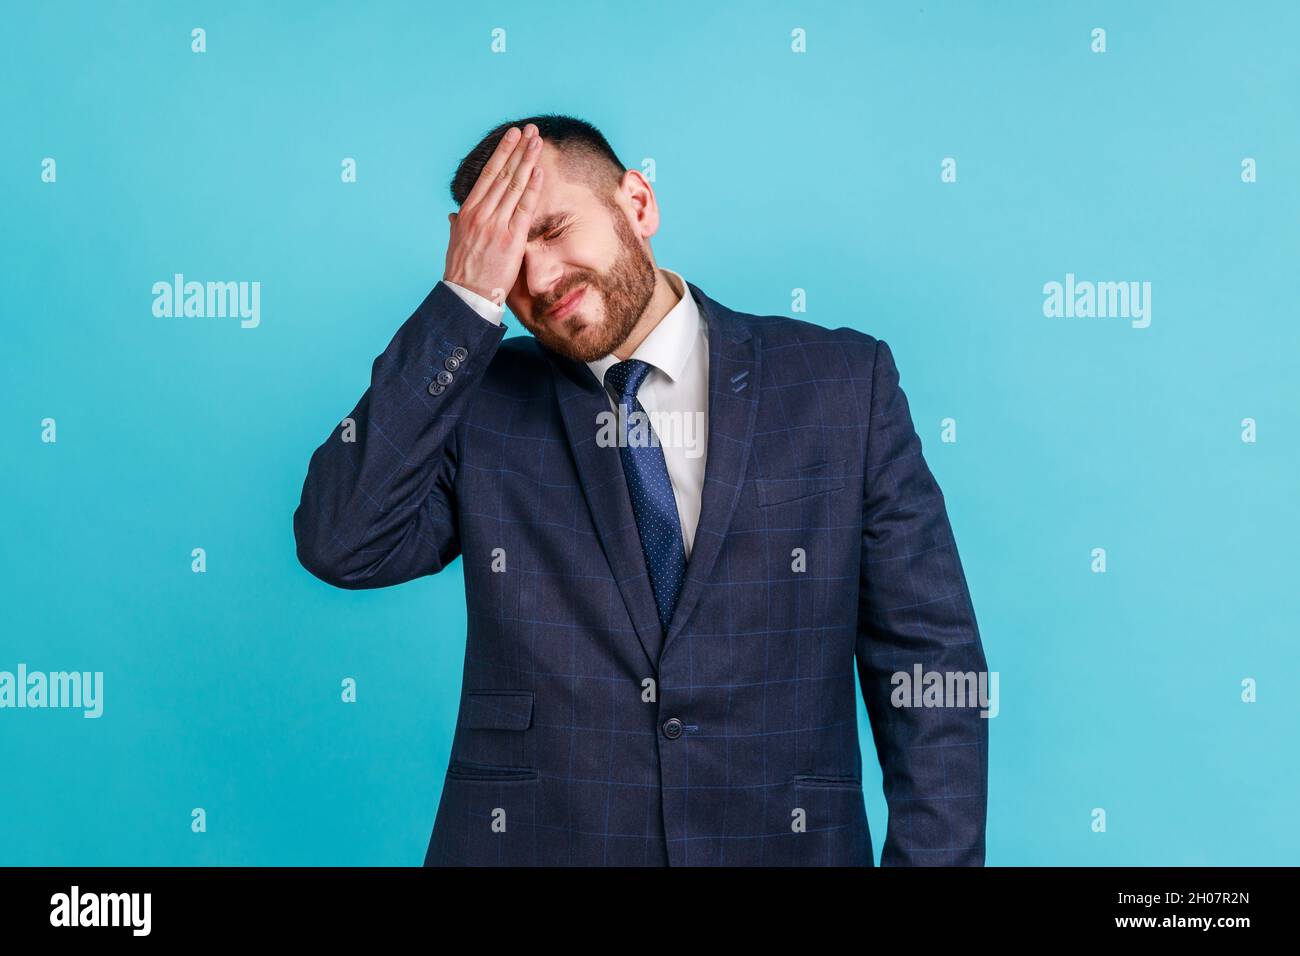 Portrait of upset bearded man wearing official style suit standing with facepalm gesture, blaming himself, feeling sorrow regret because of bad memory. Indoor studio shot isolated on blue background. Stock Photo